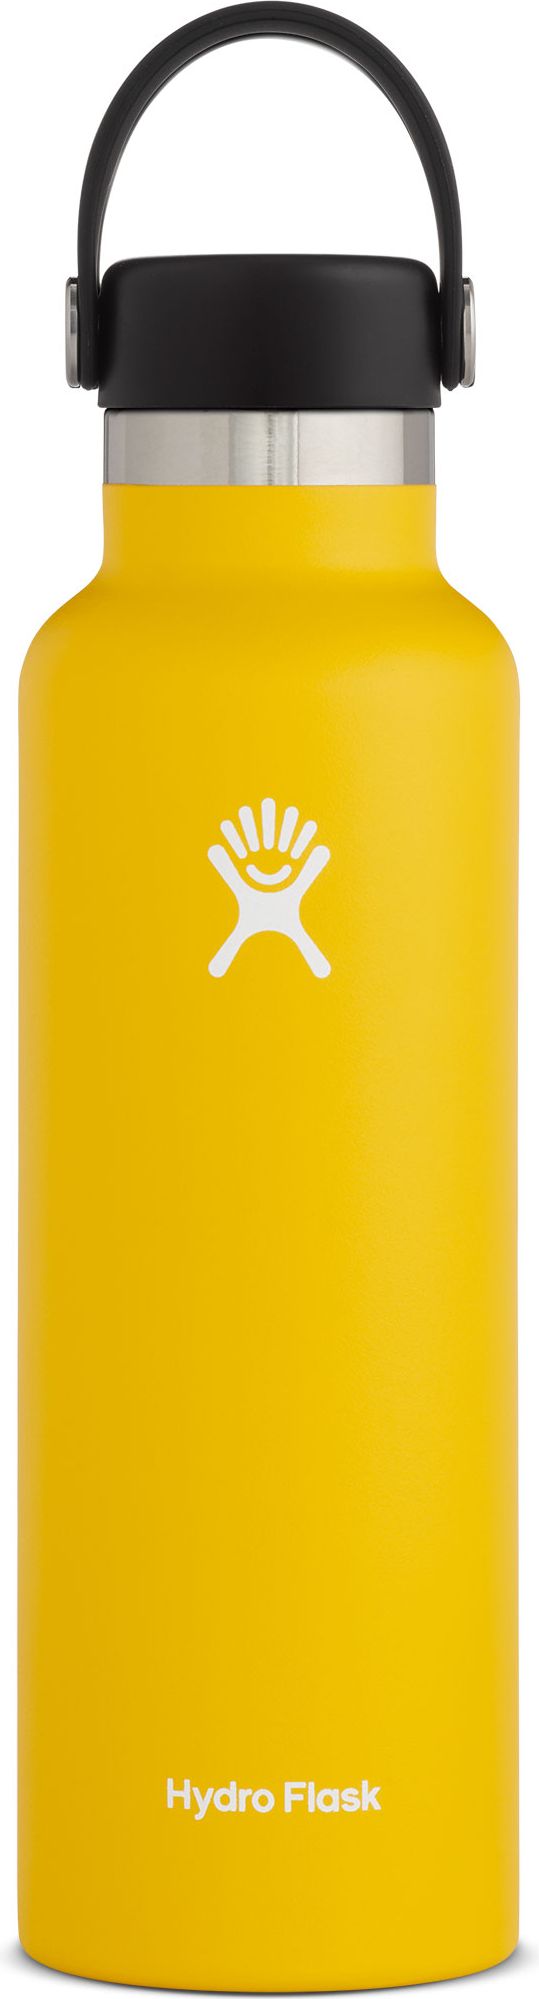 Hydro Flask Accessories 21oz Standard Mouth Sunflower